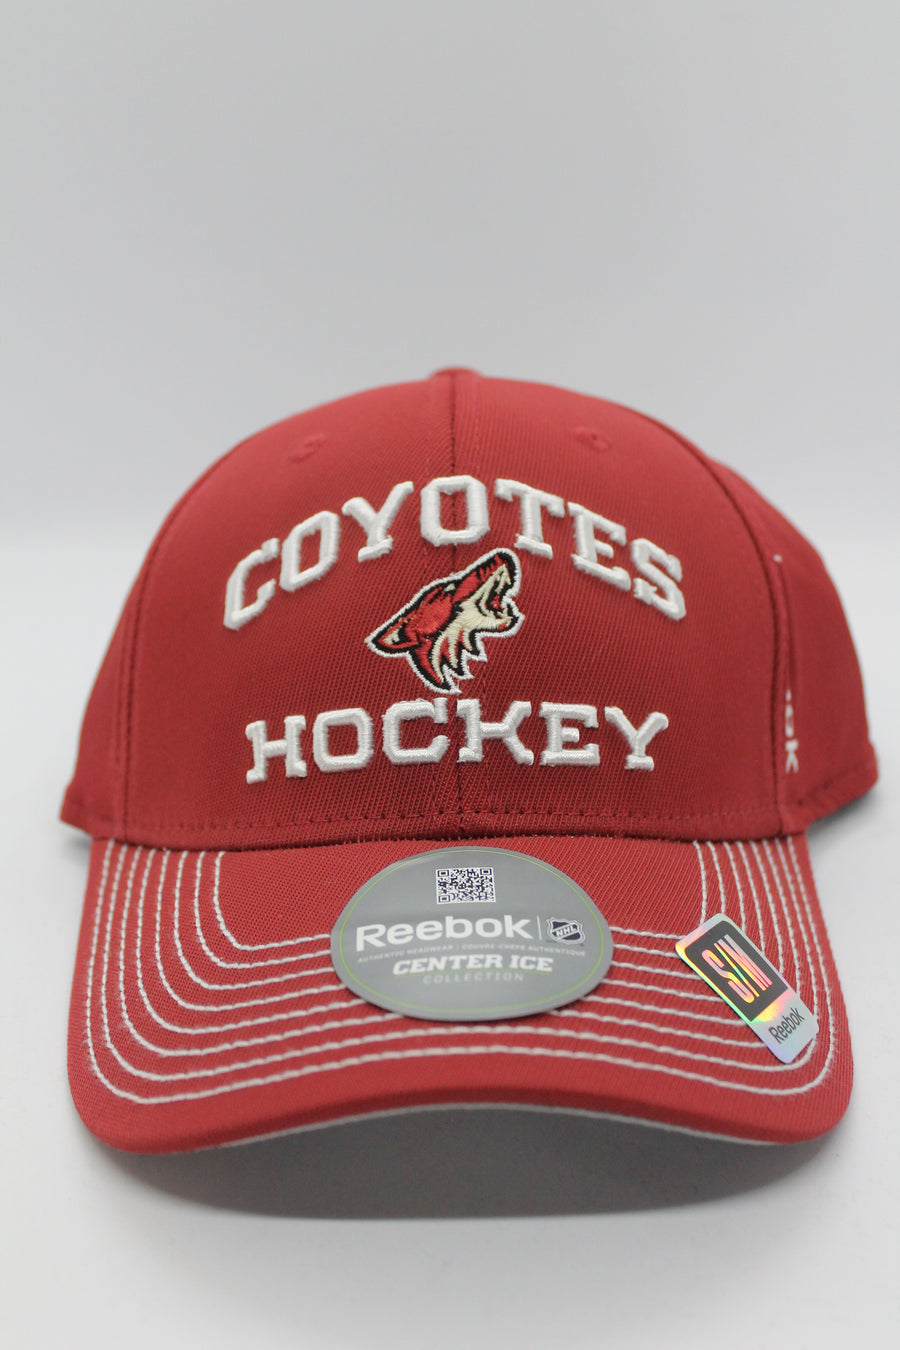 NHL Phoenix Coyotes Reebok Center Ice Stretch Fit Hat